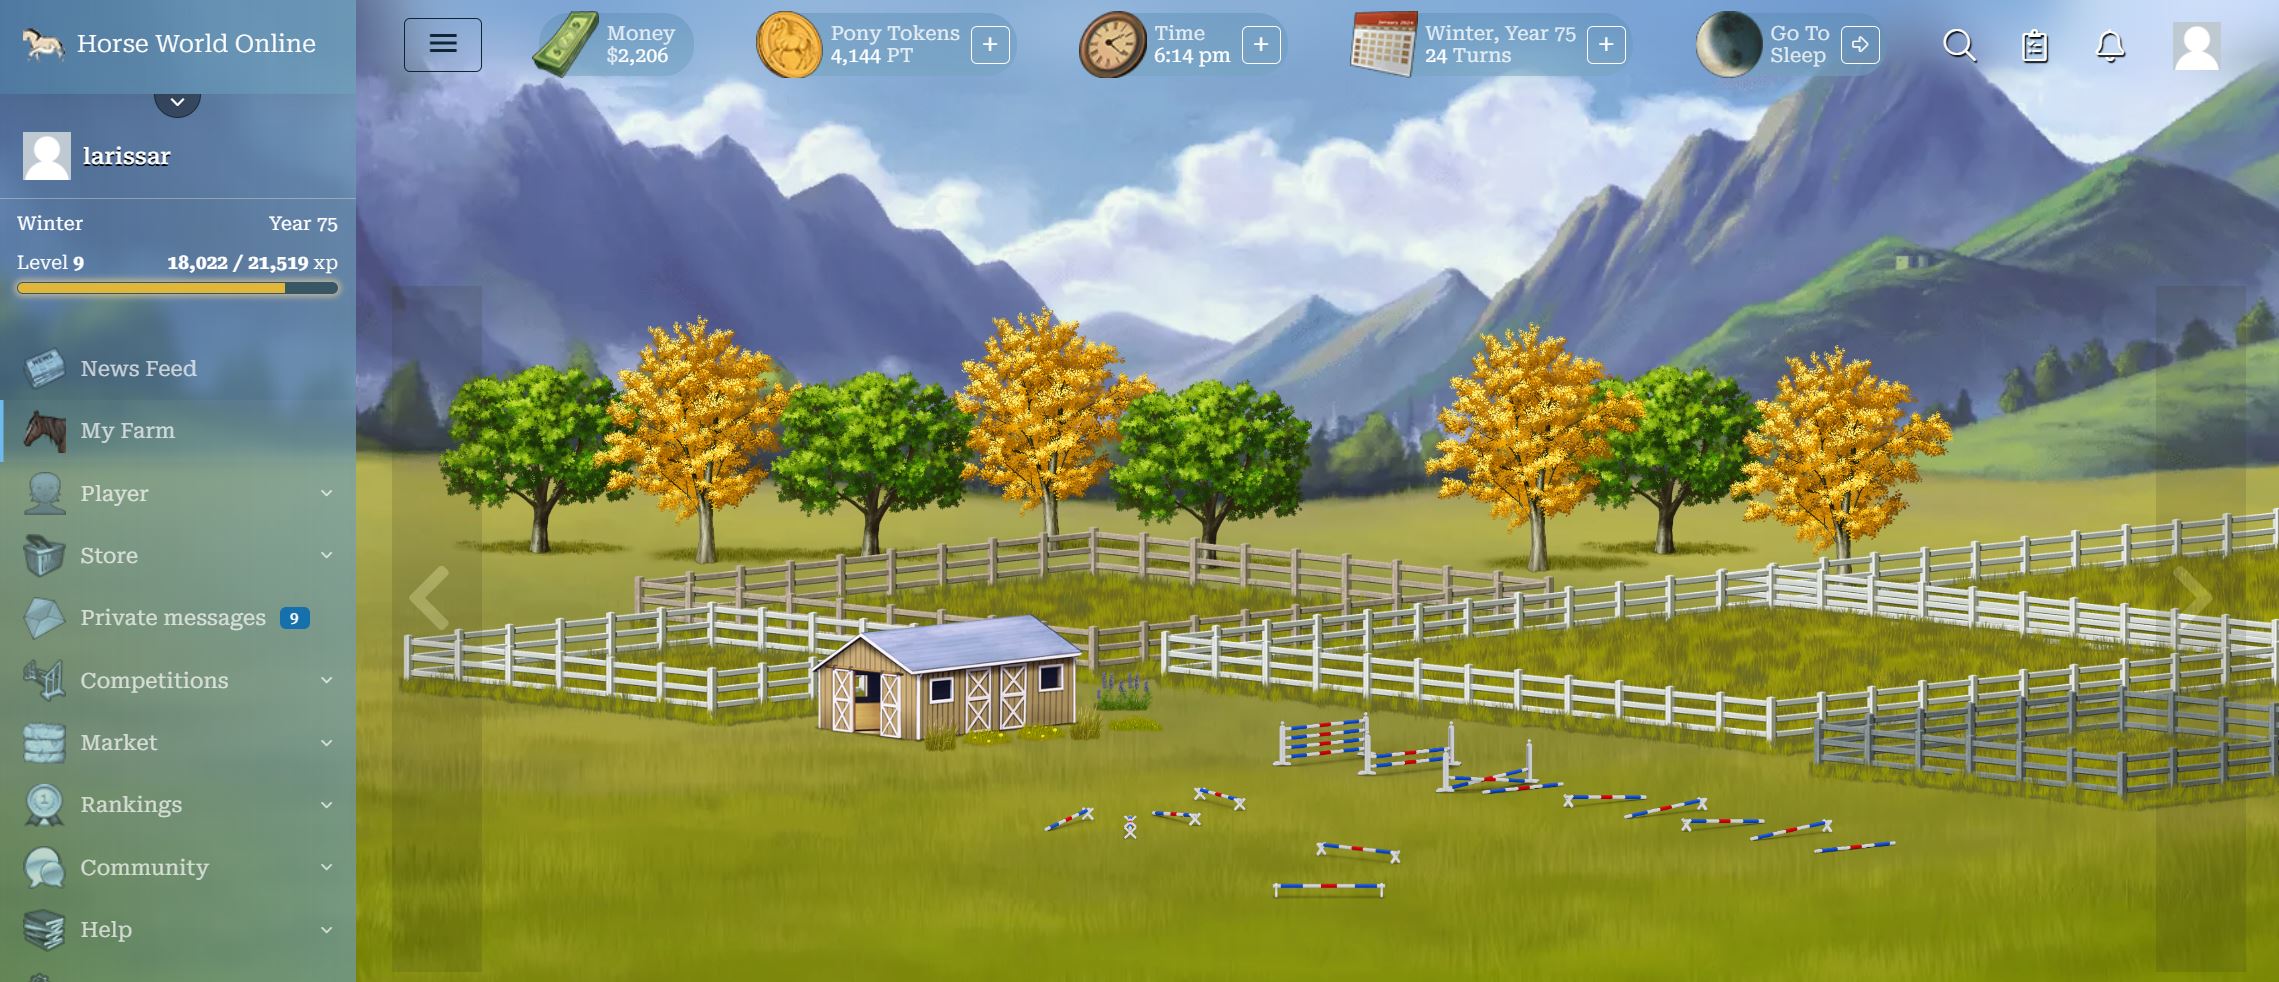 Horse World Online at Top Web Games